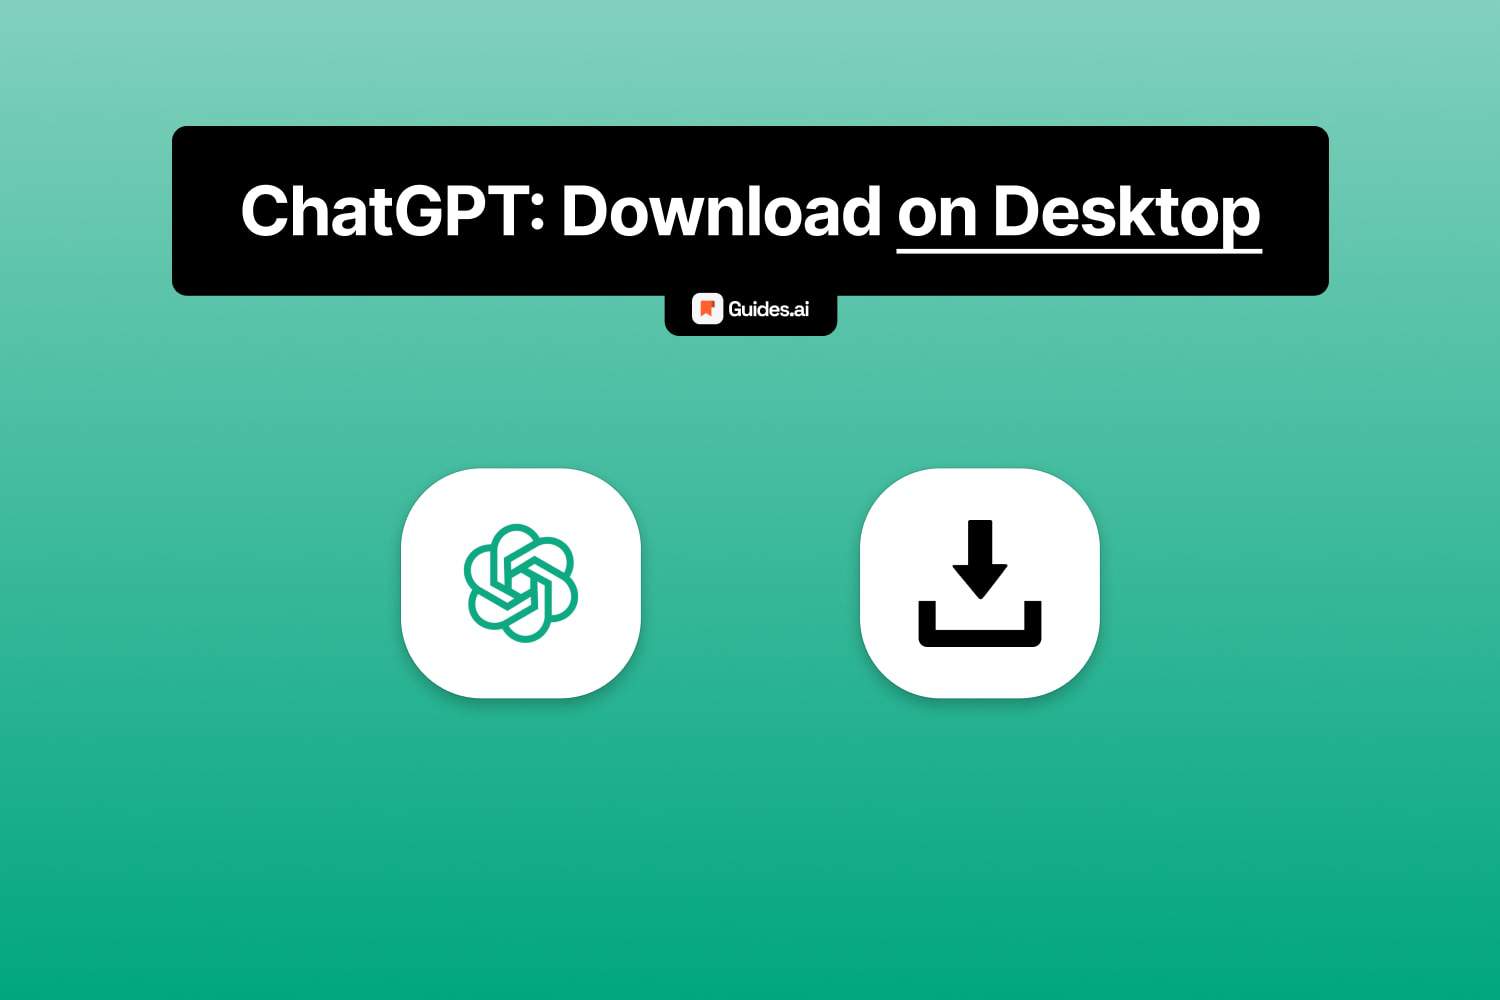 How to use ChatGPT on Desktop